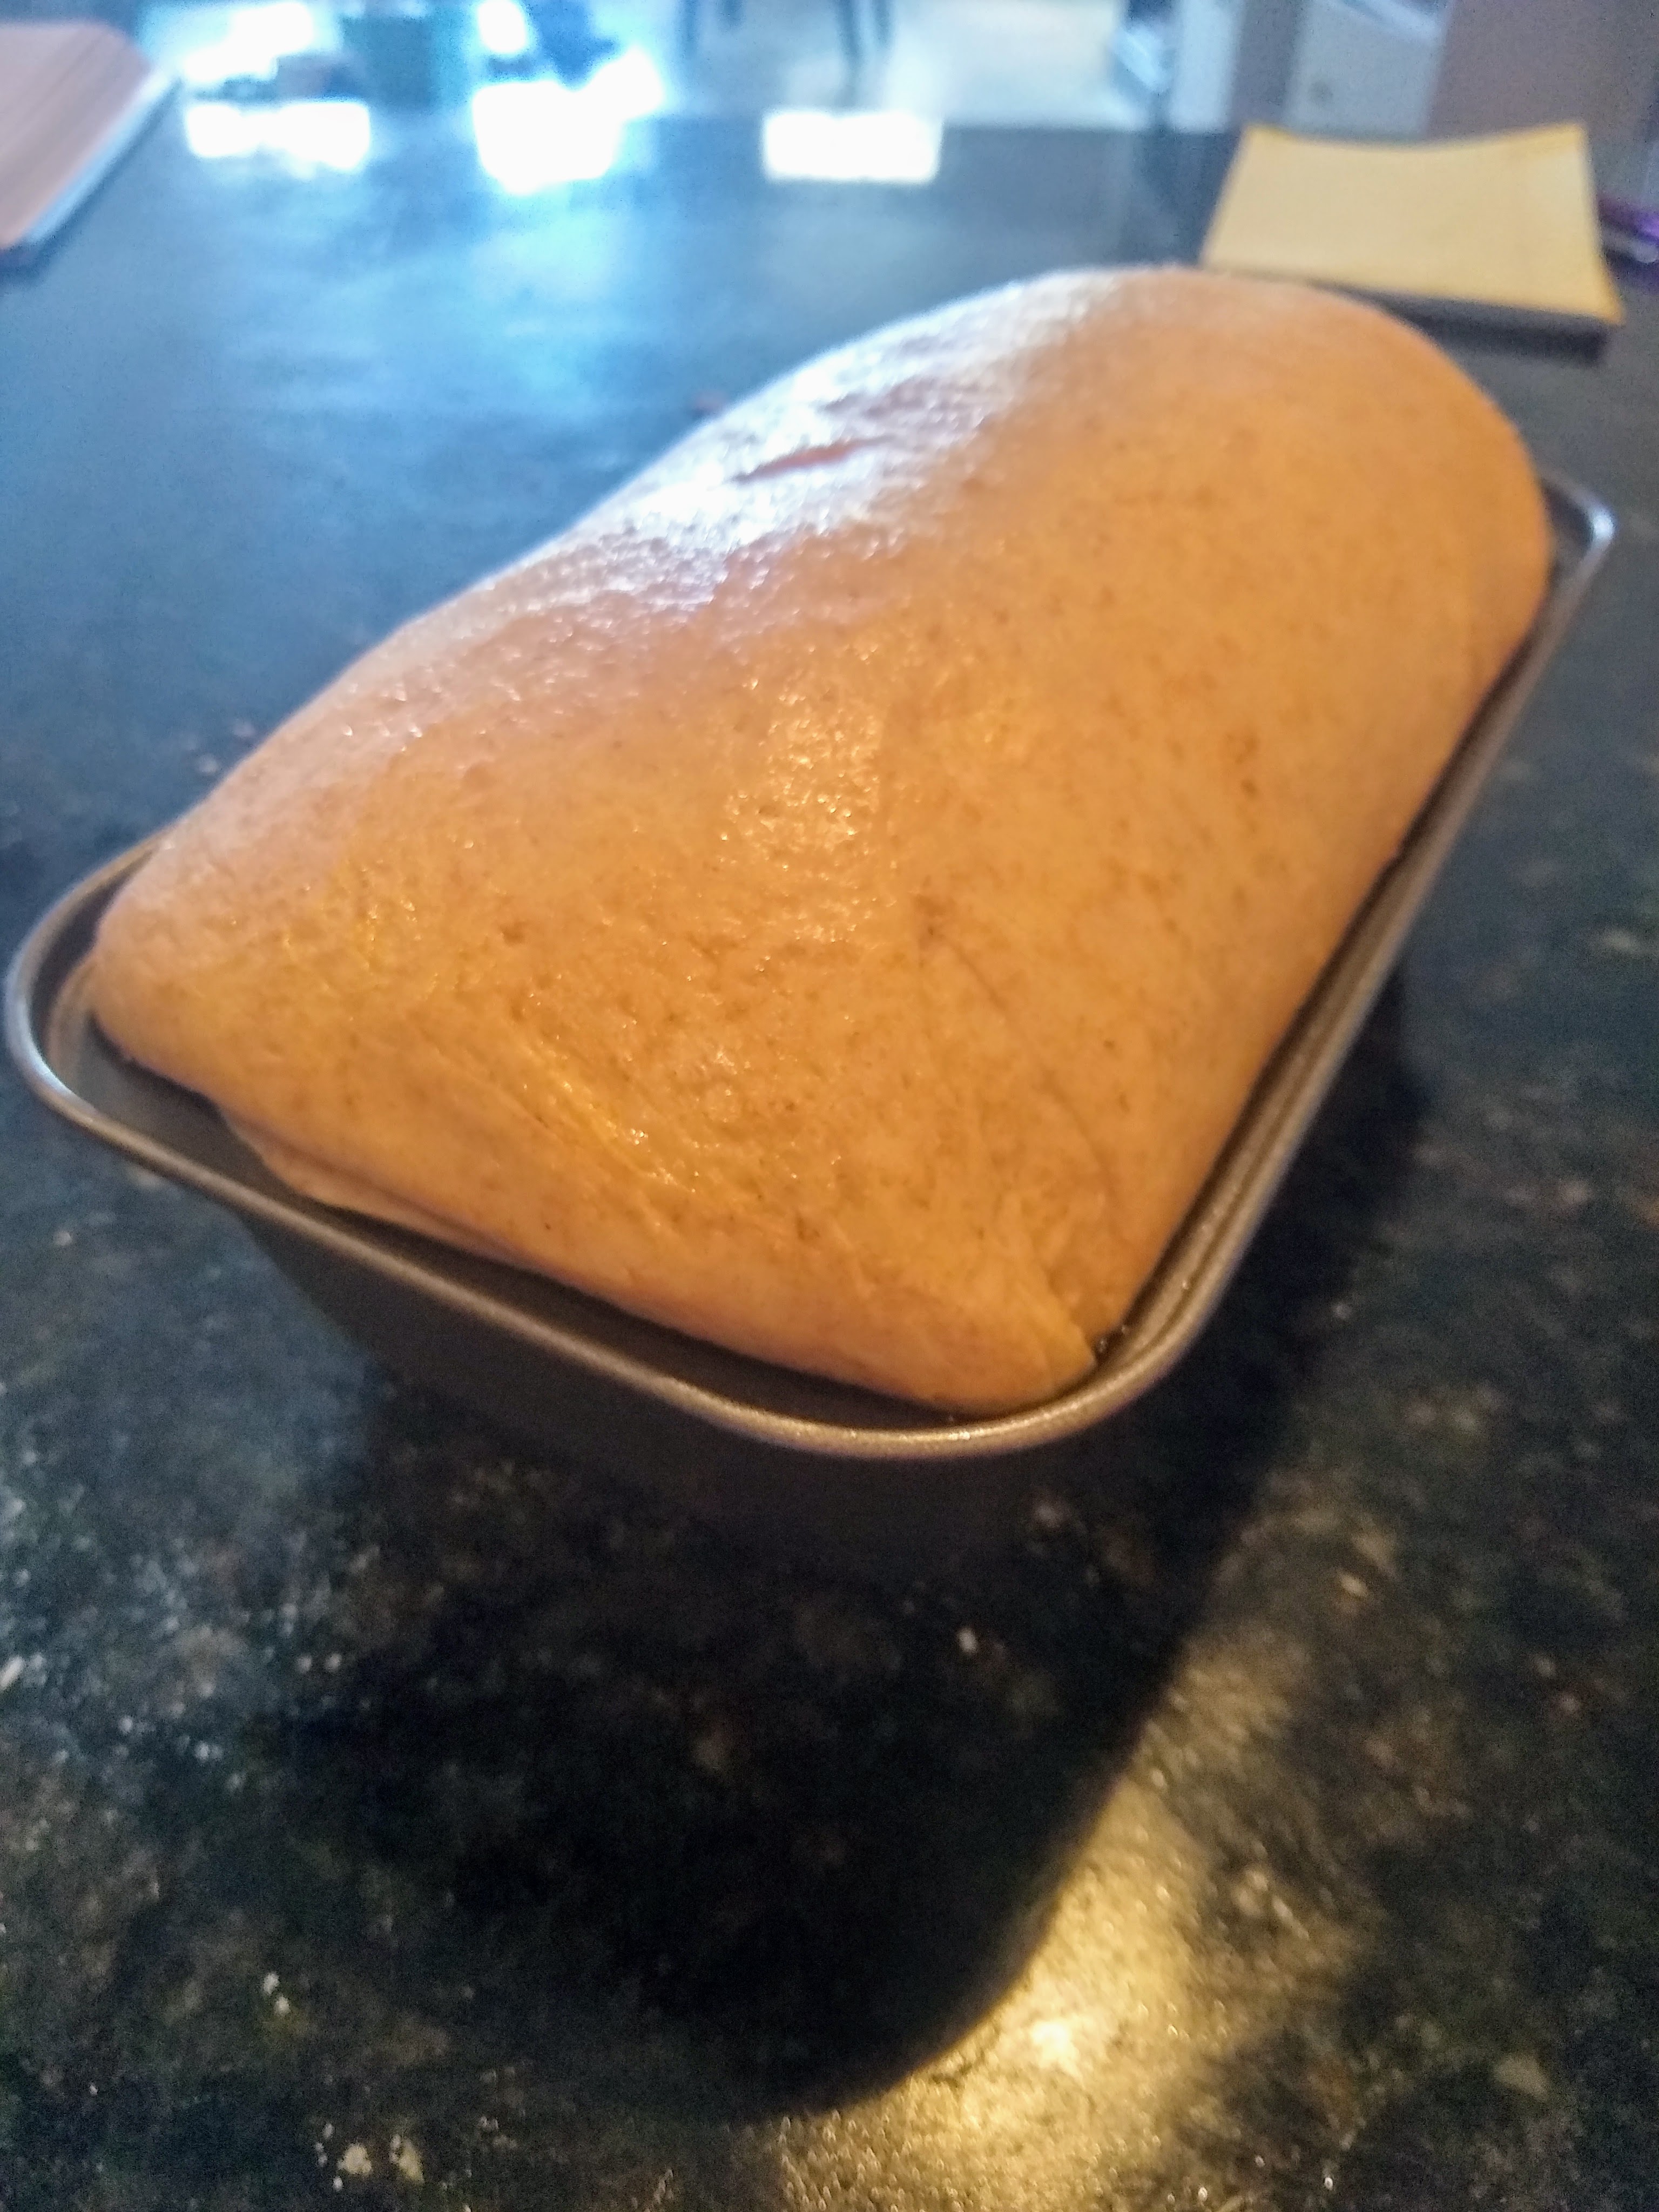 Light wheat bread after proofing